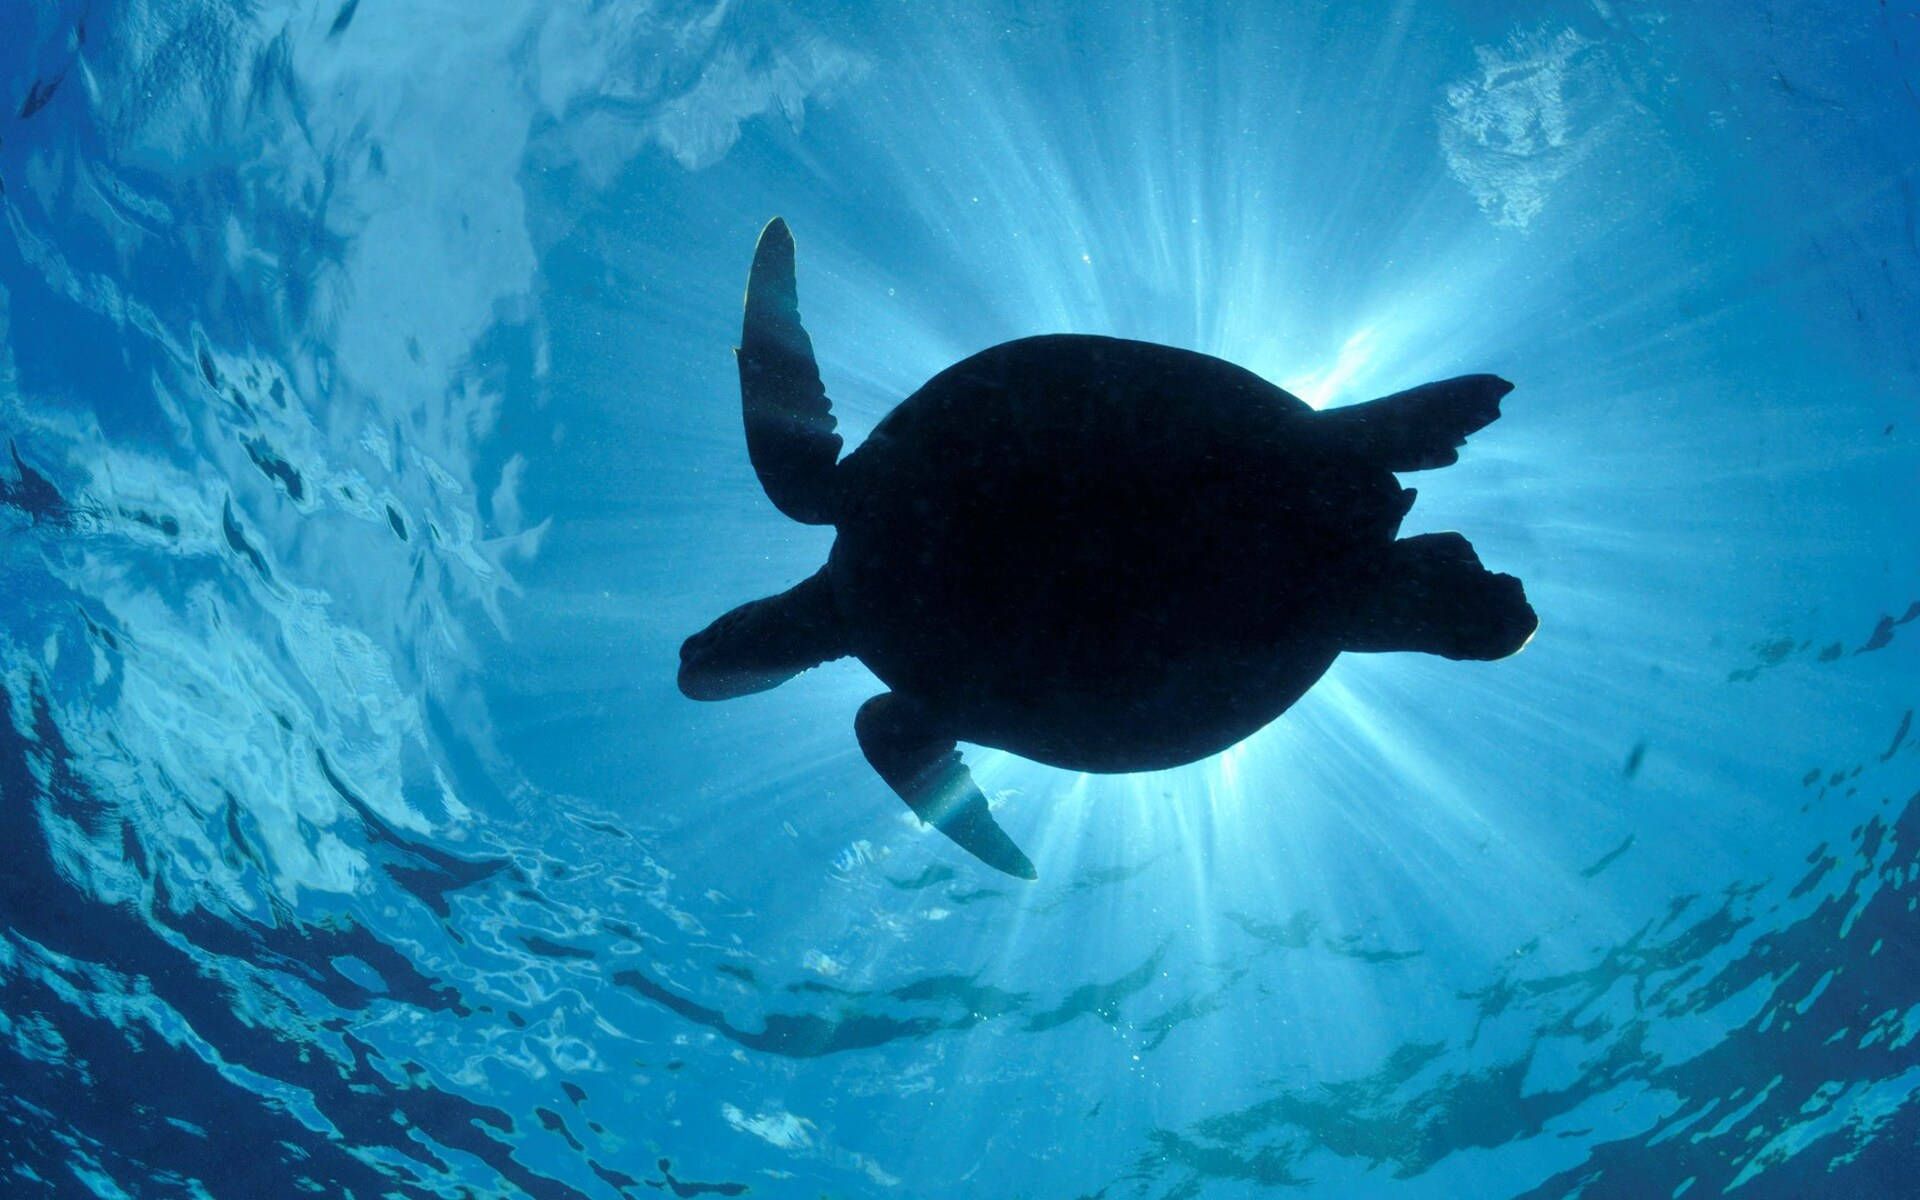 A turtle swimming under the water with sun shining - Turtle